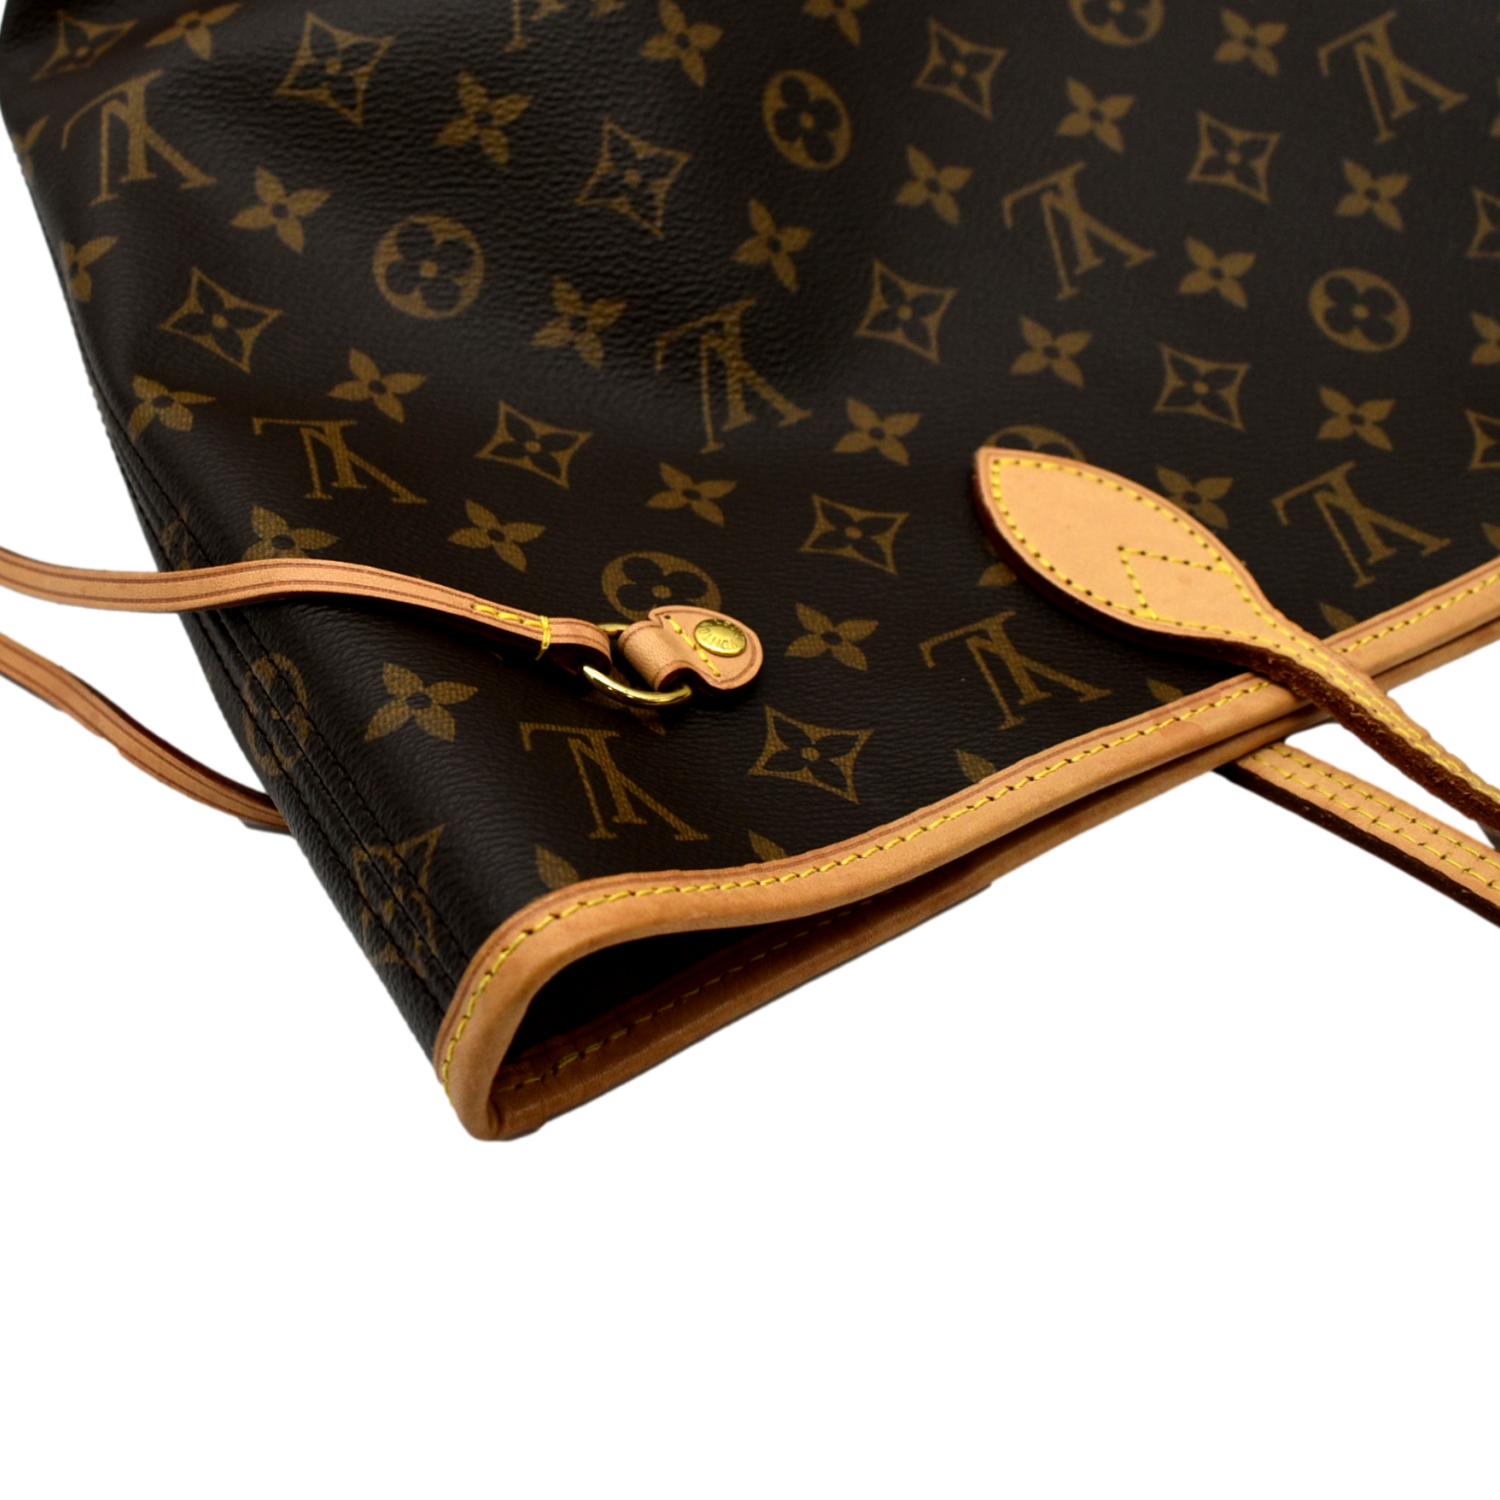 Louis Vuitton Neverfull MM Monogram Lined In Red